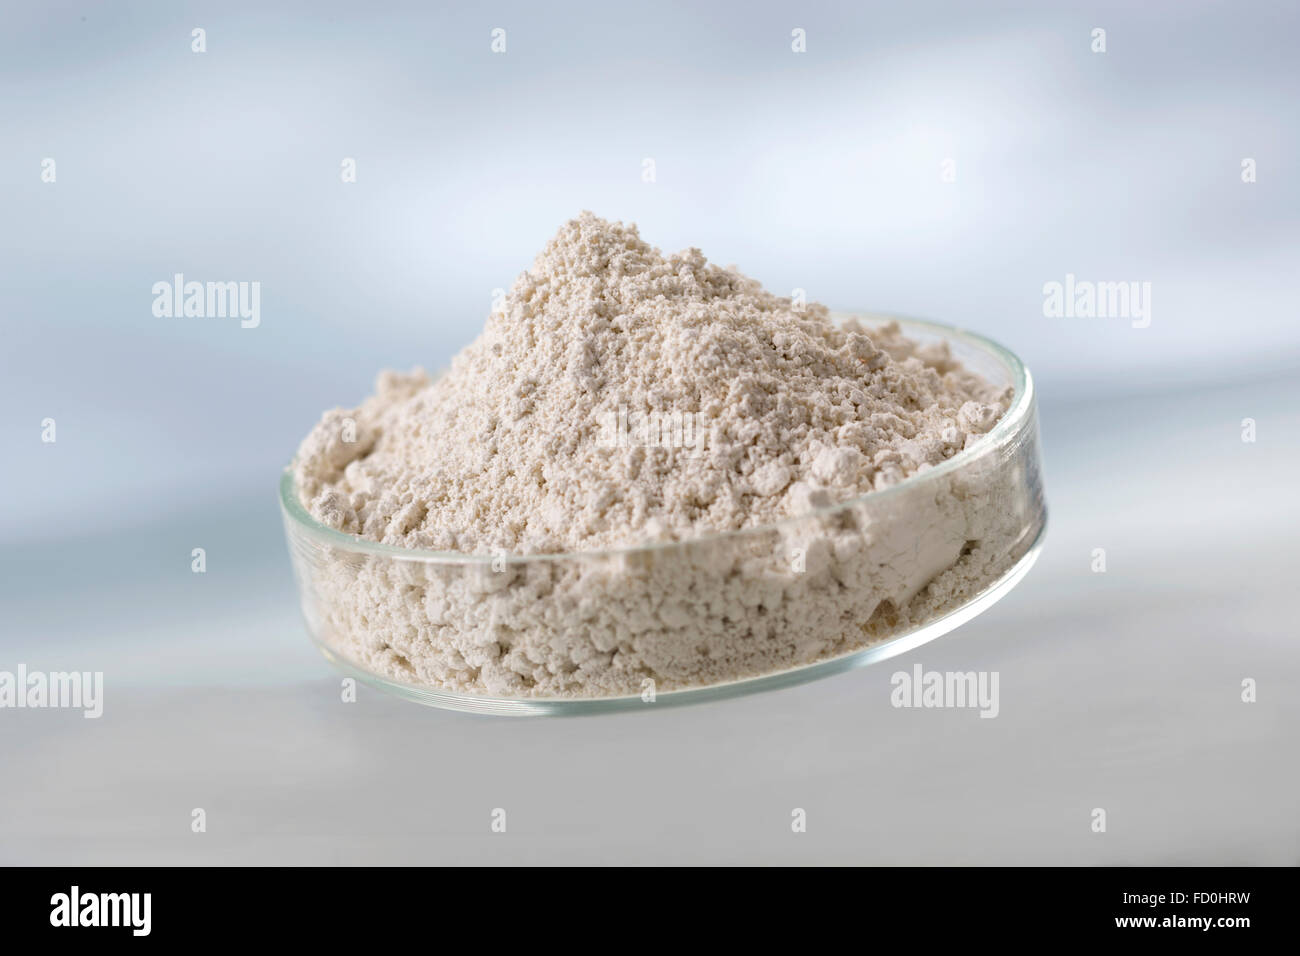 Cosmetic clay for spa treatments Stock Photo